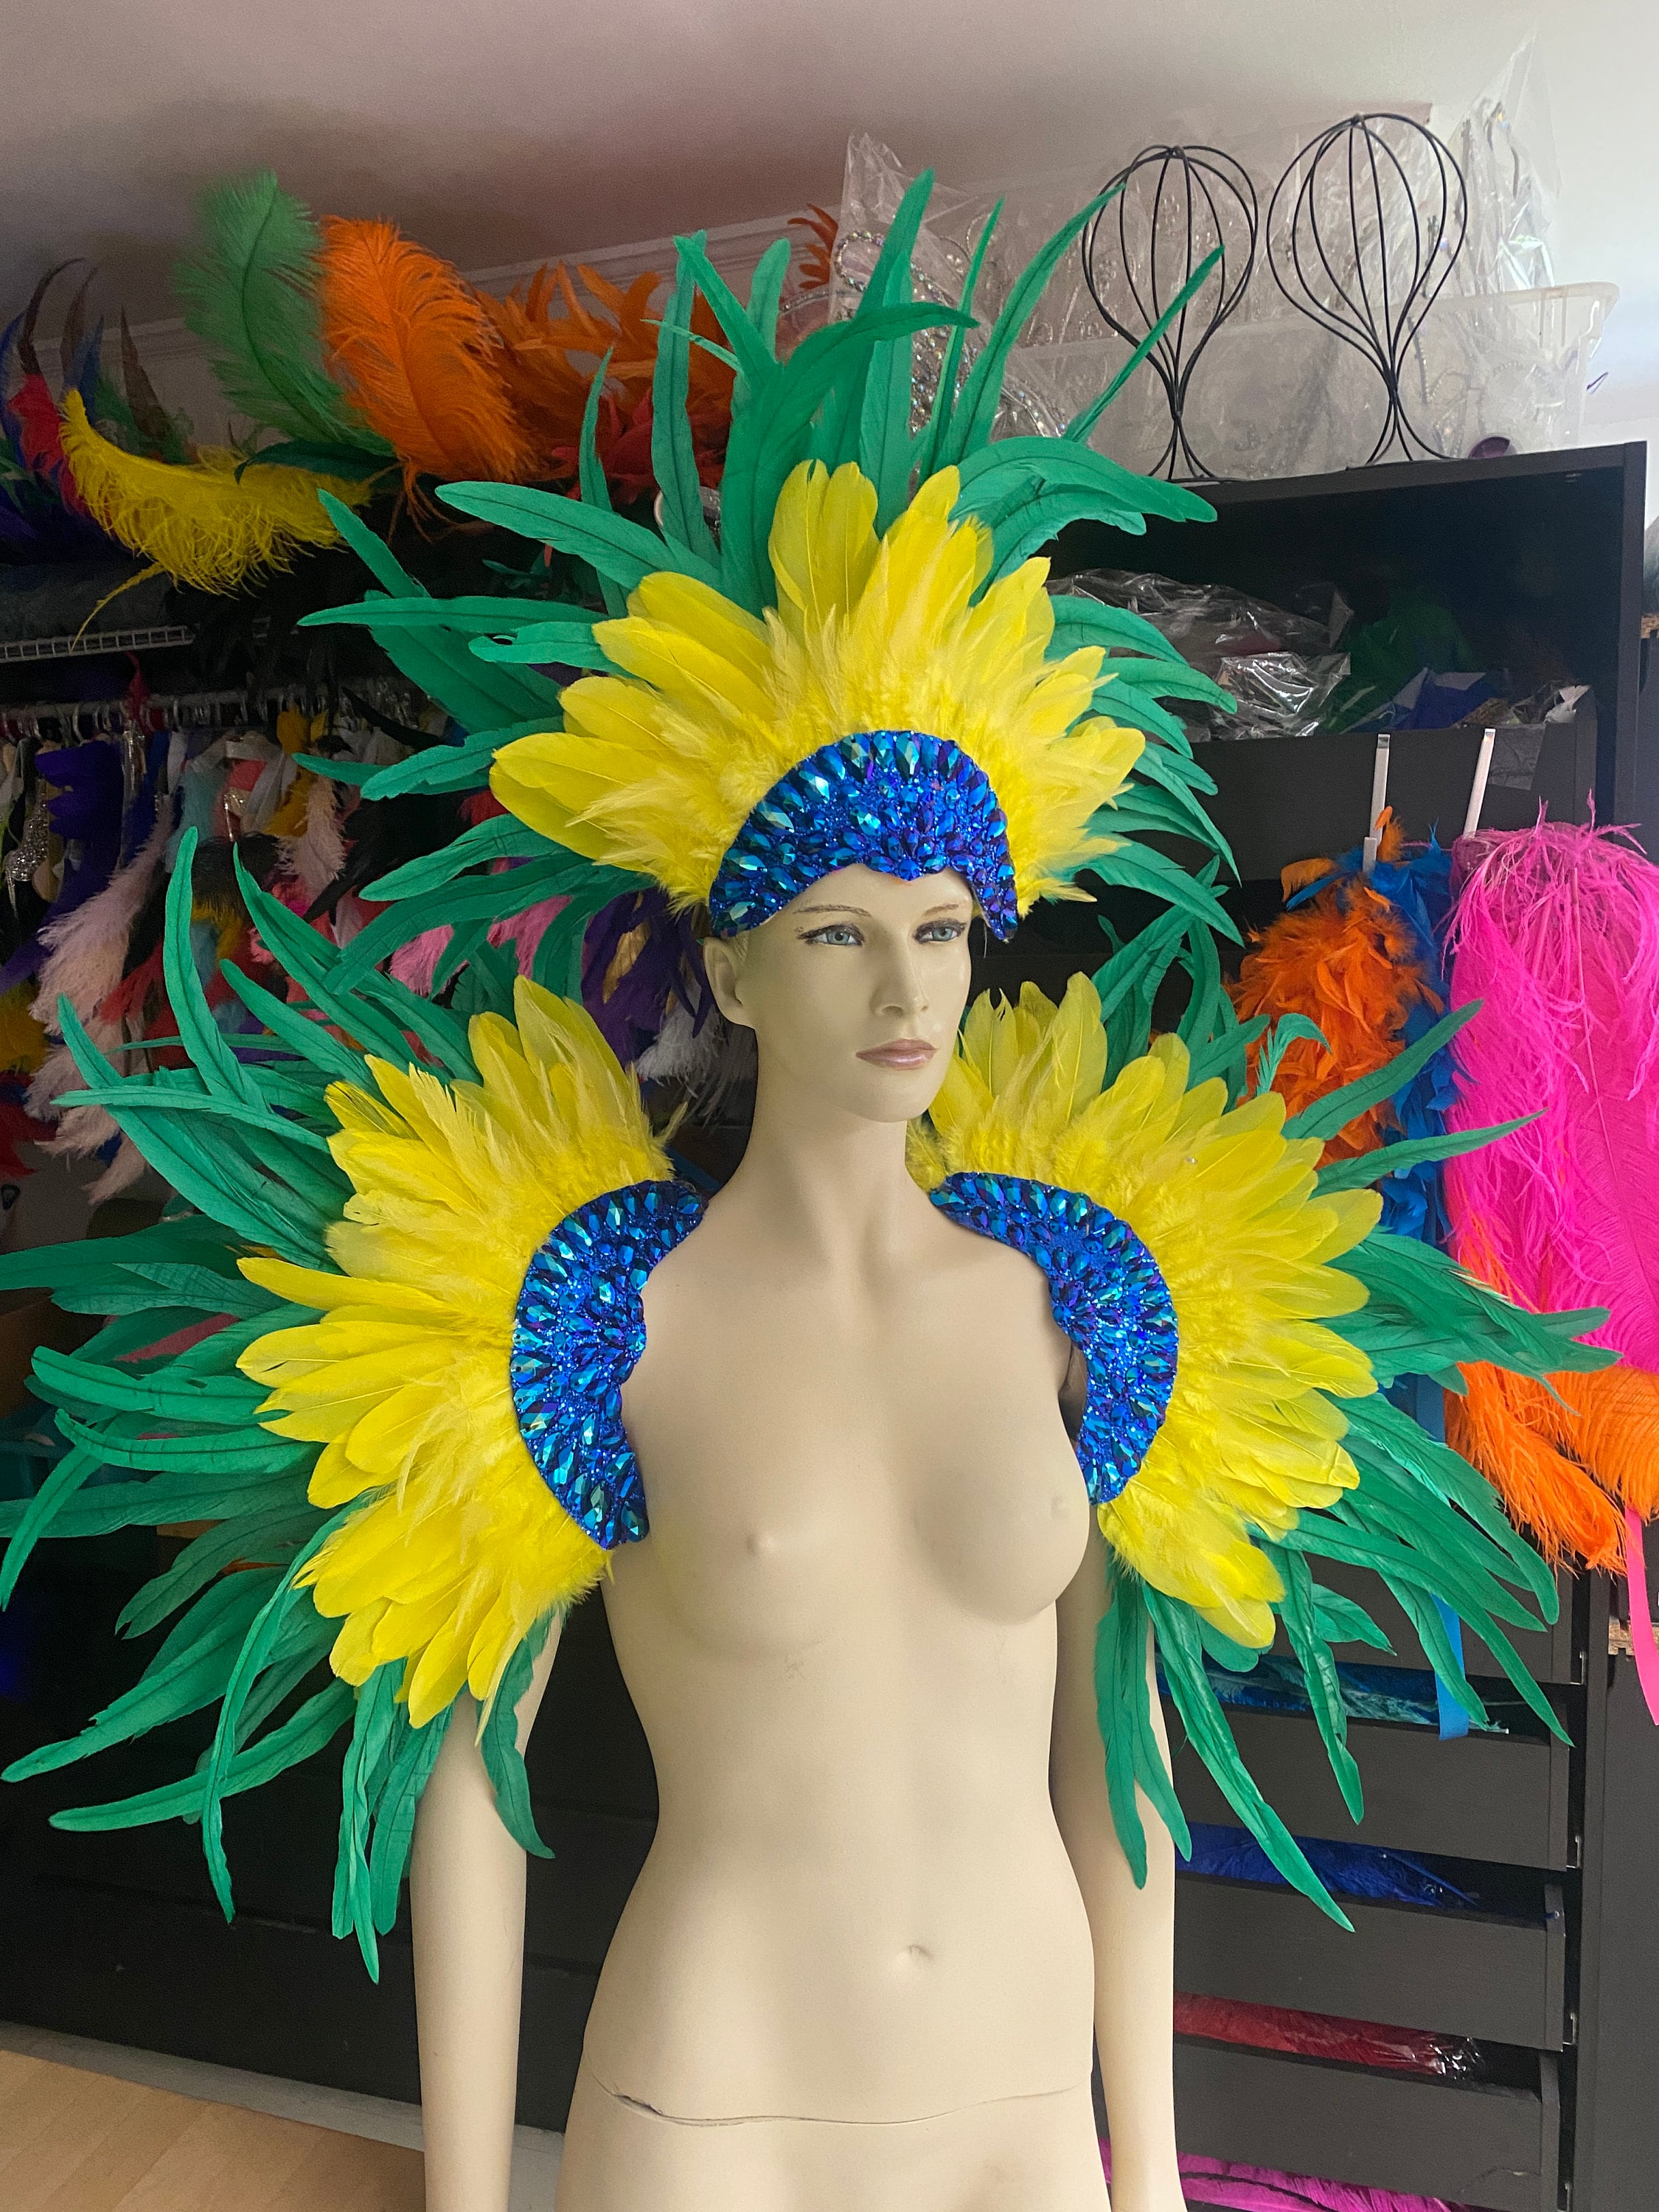 Buy Peacock Carnival Costume Feathers Samba Costume Angel Wings Fantasy  Fest Carnival Showgirl Set Hora Loca Online in India 